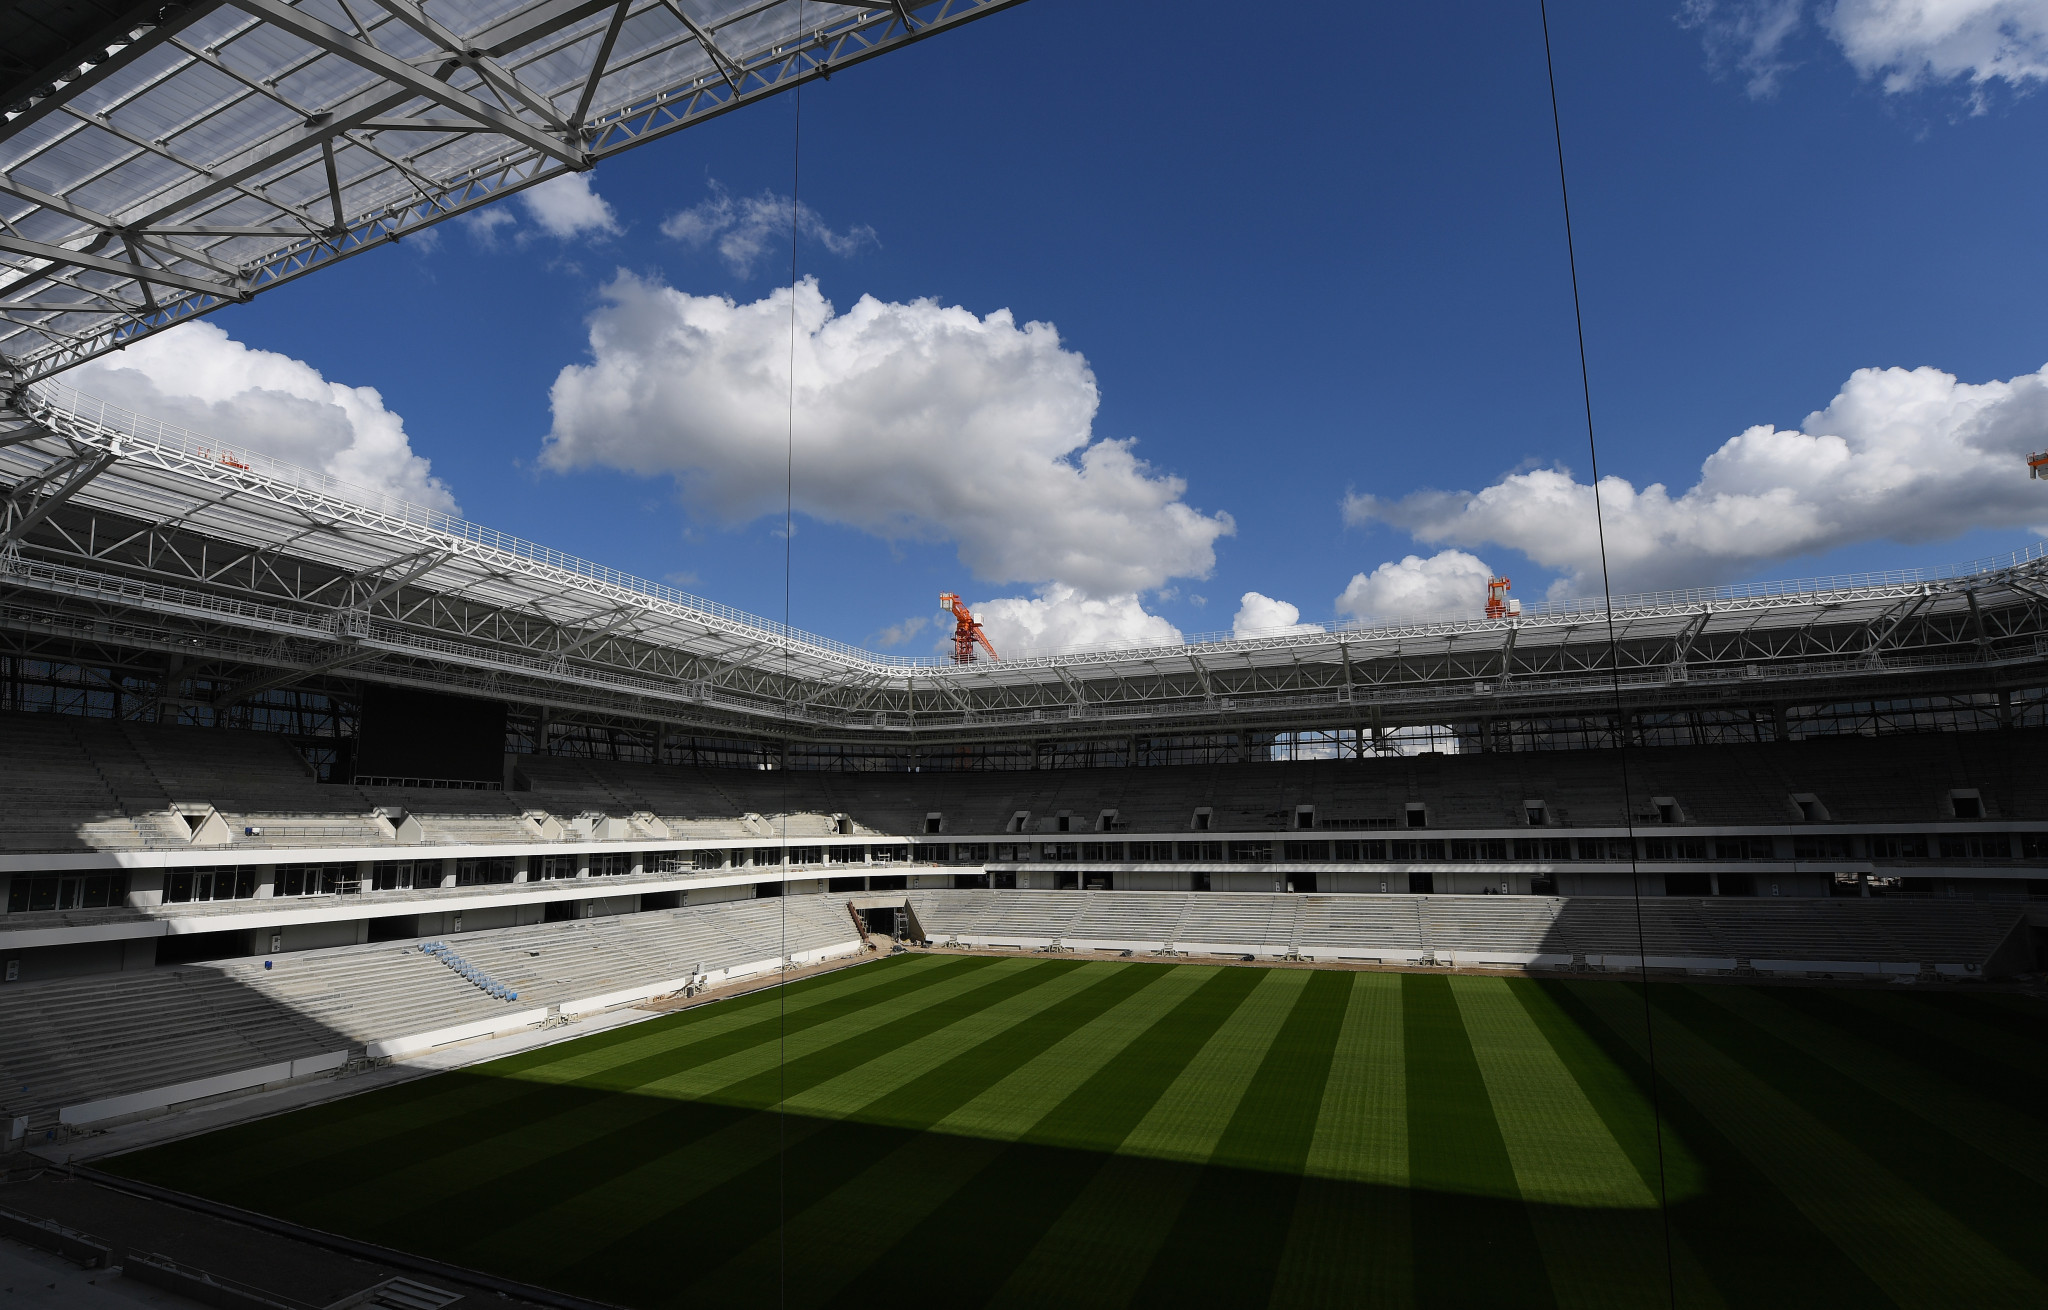 FIFA 2018 World Cup stadia to be ready on time, Russian Minister says